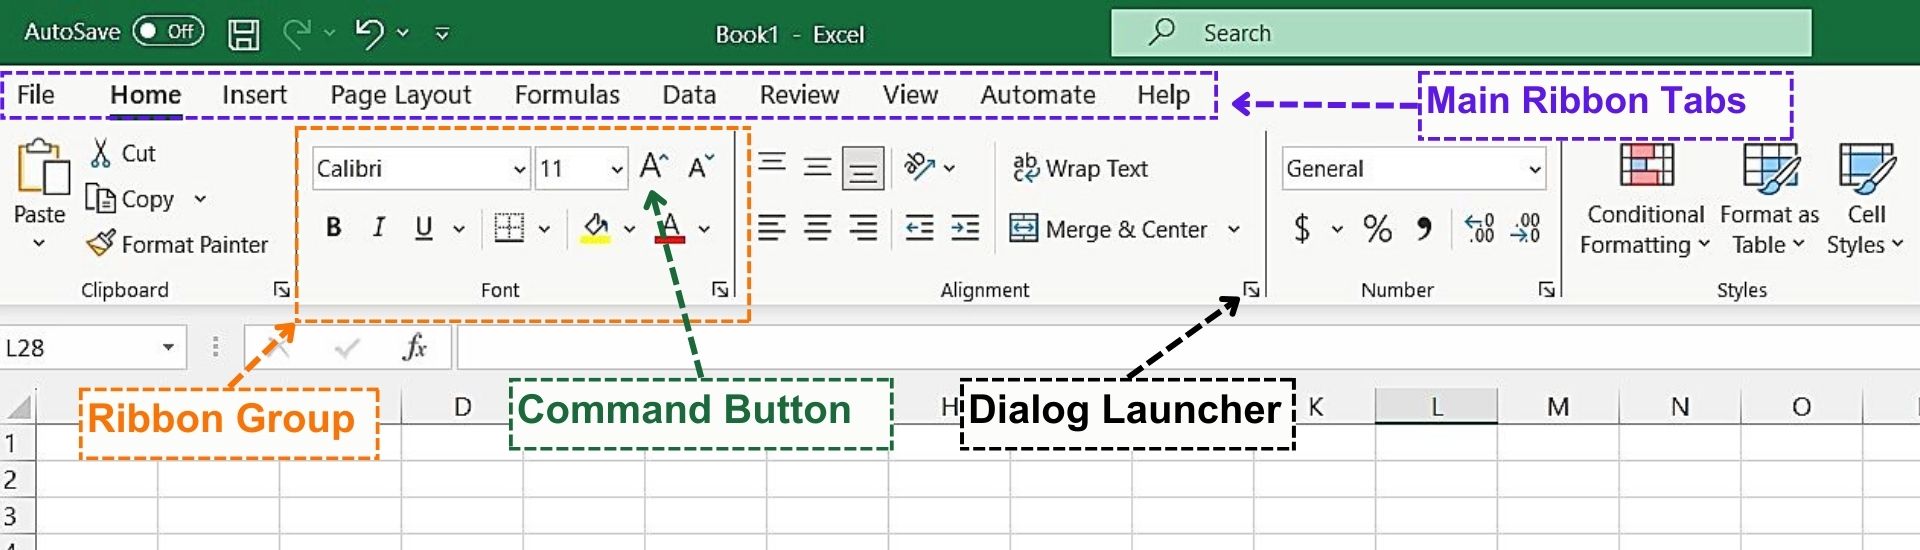 Main Ribbon Tabs, Ribbon Group, Dialog Launcher and Command Button - Excel Hippo